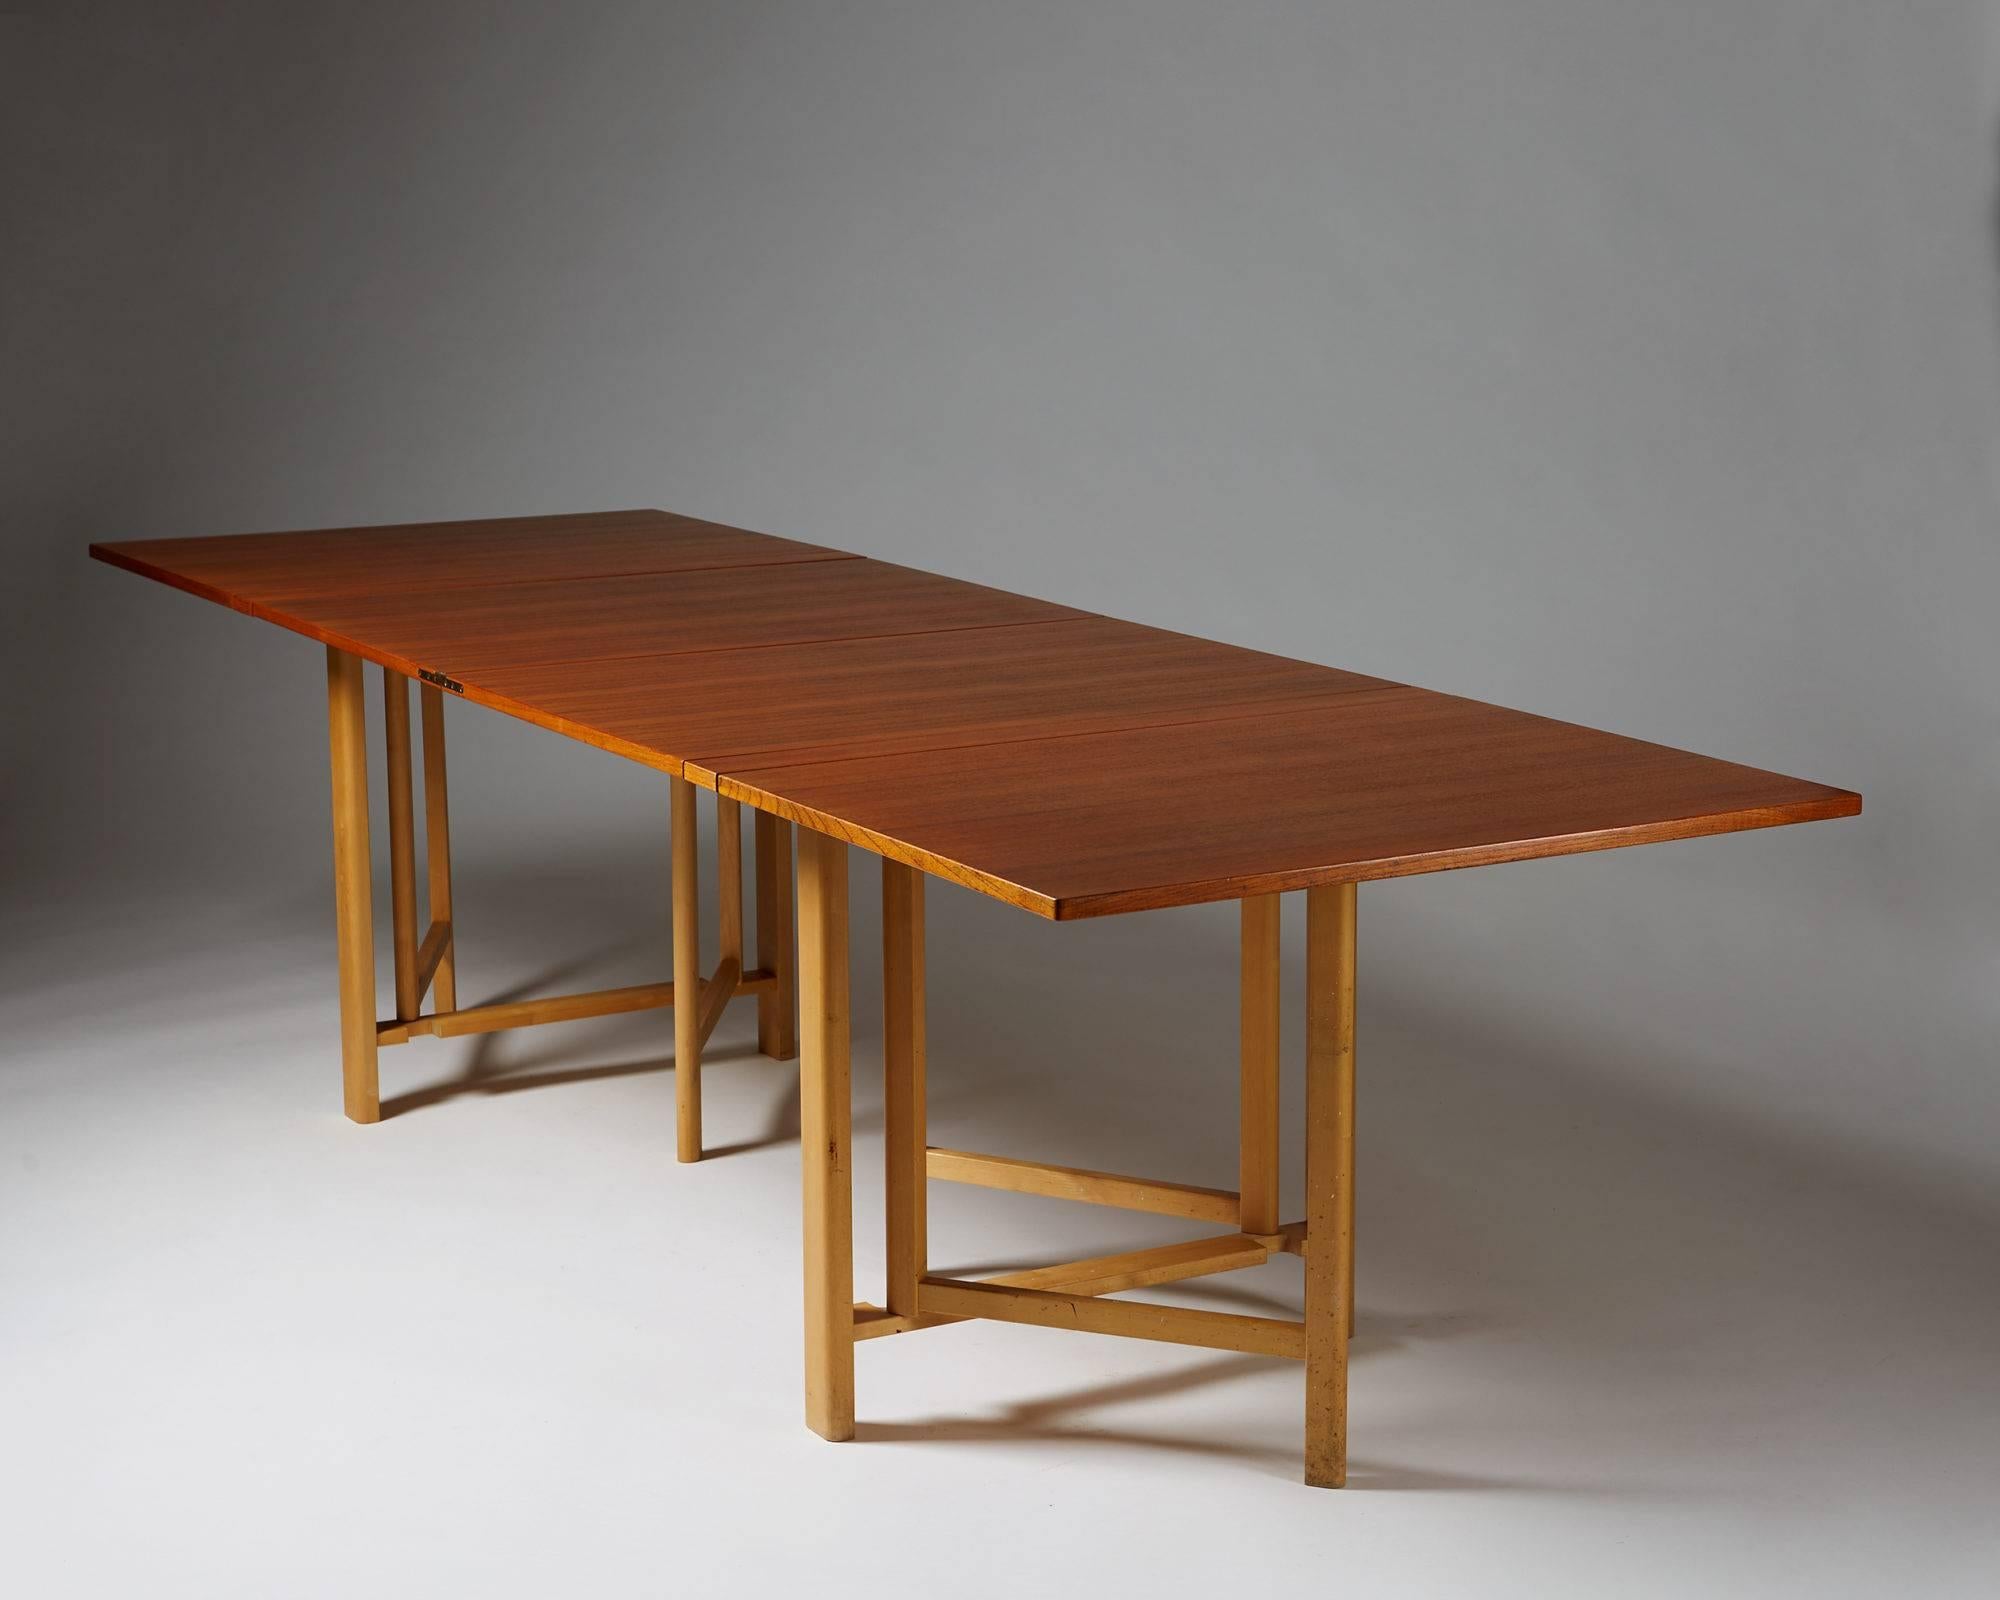 Dining table “Maria Flap” designed by Bruno Mathsson for Mathsson International, Sweden, 1965.
Teak top with beech legs.

Measure: H 72 cm/ 2' 4 1/2''
W 90 cm/ 3'
L 23 to 278 cm/ 9'' to 9' 2''.